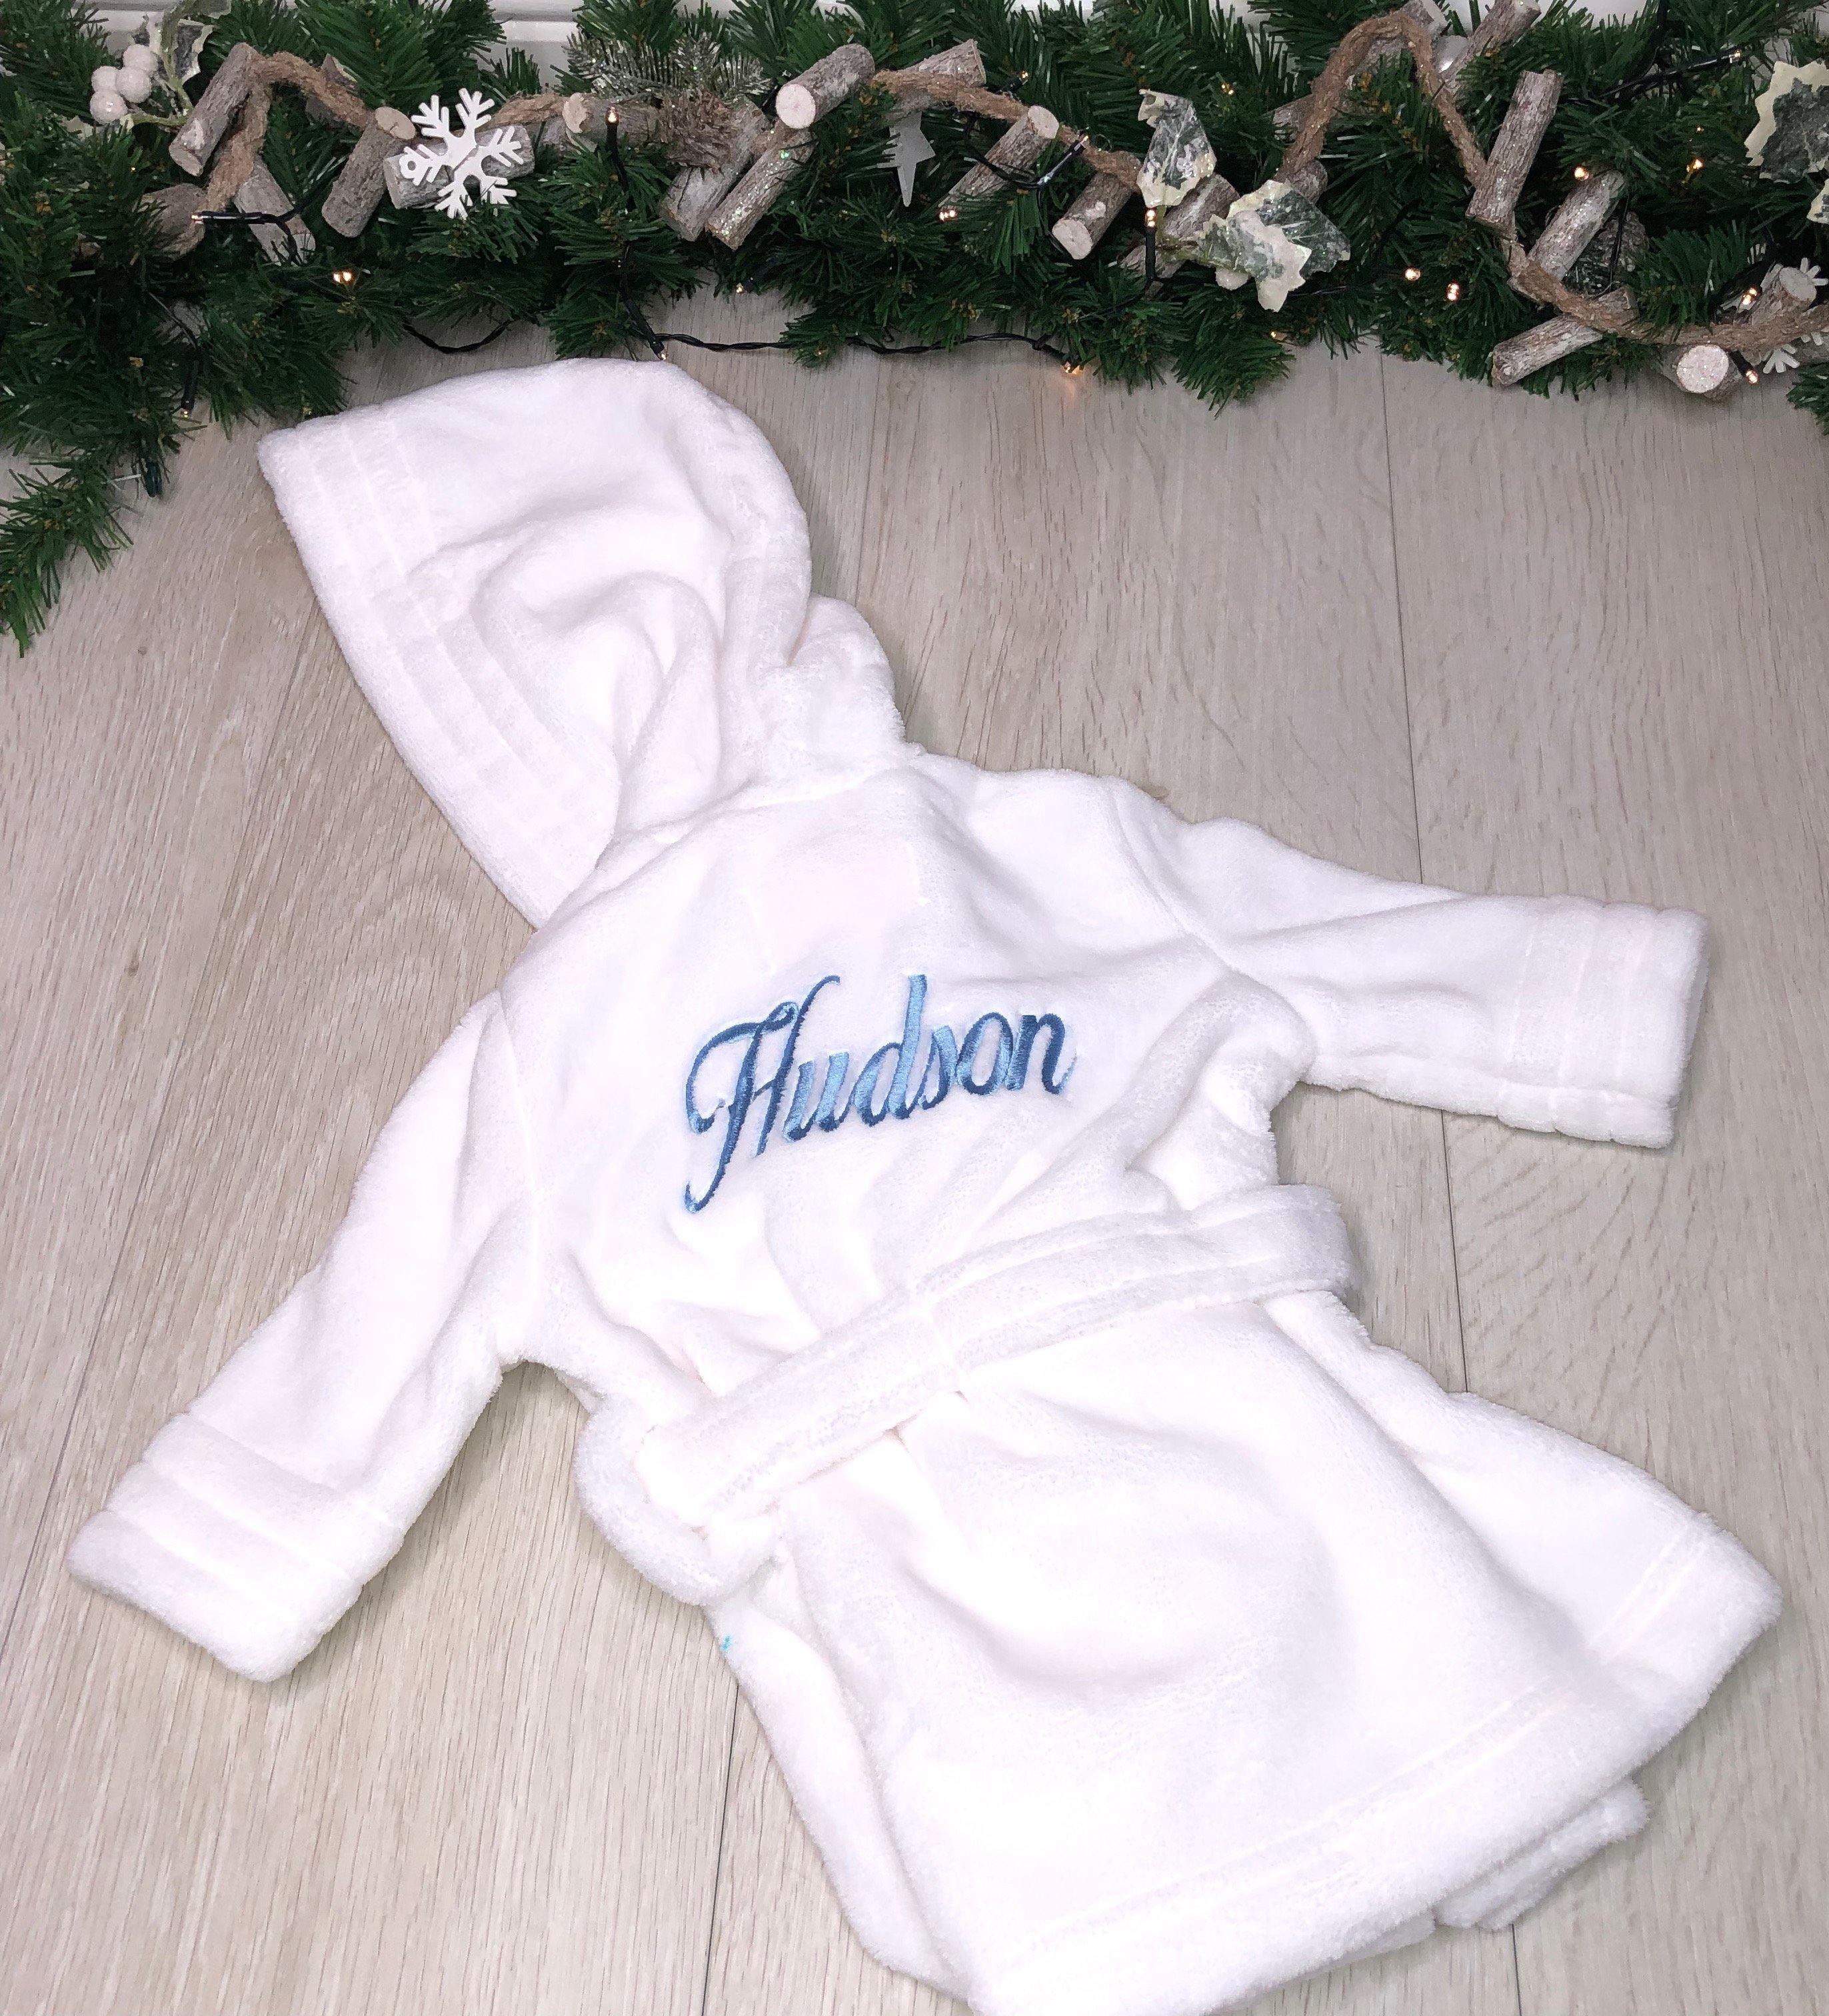 Boys Fluffy White Christmas Robes - Robes 4 You